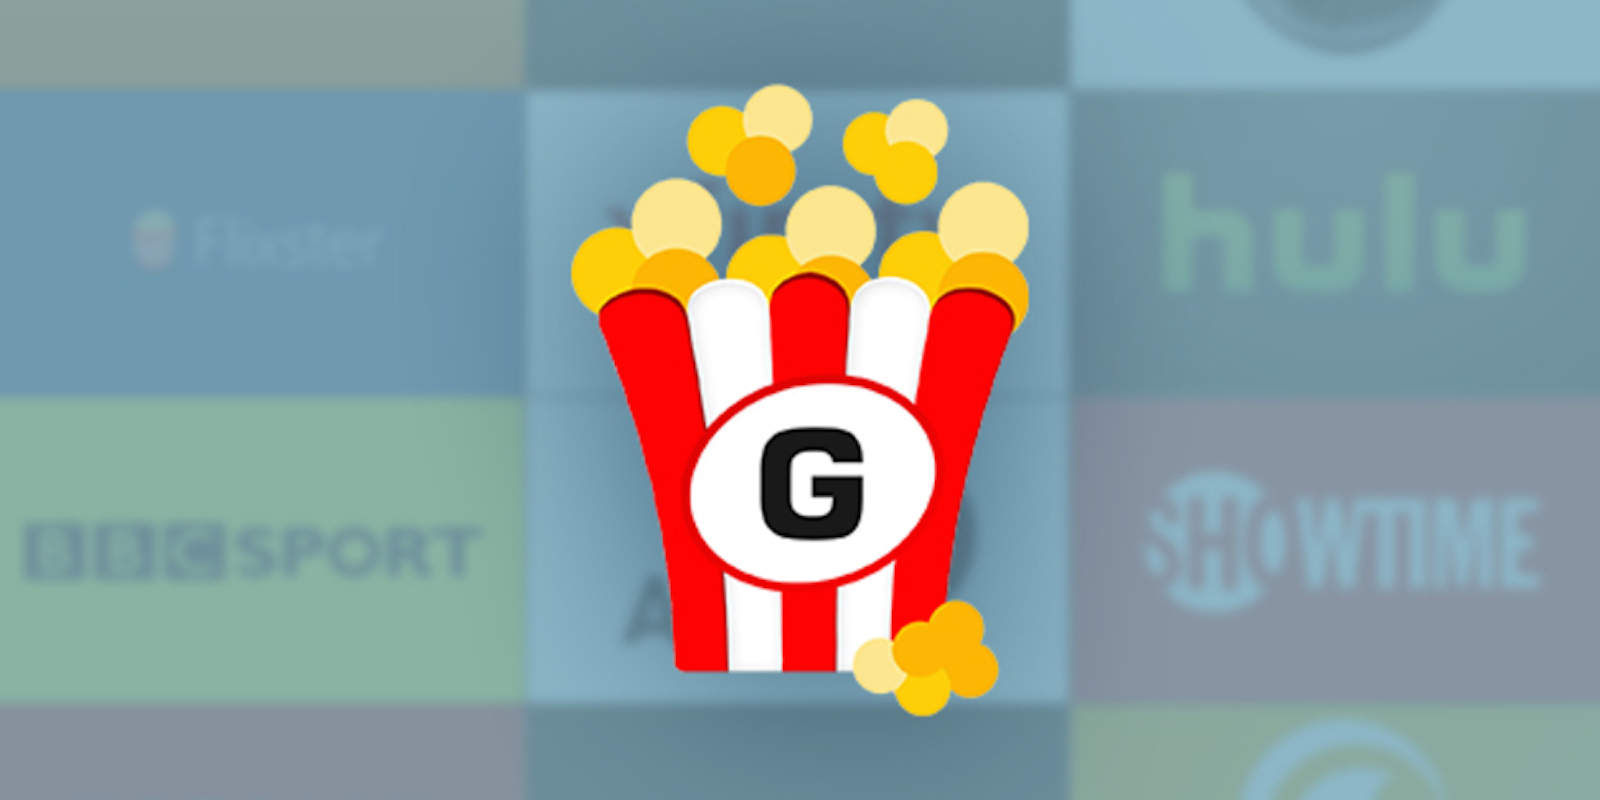 Getflix lets you go anywhere without losing your favorite movies and TV shows.